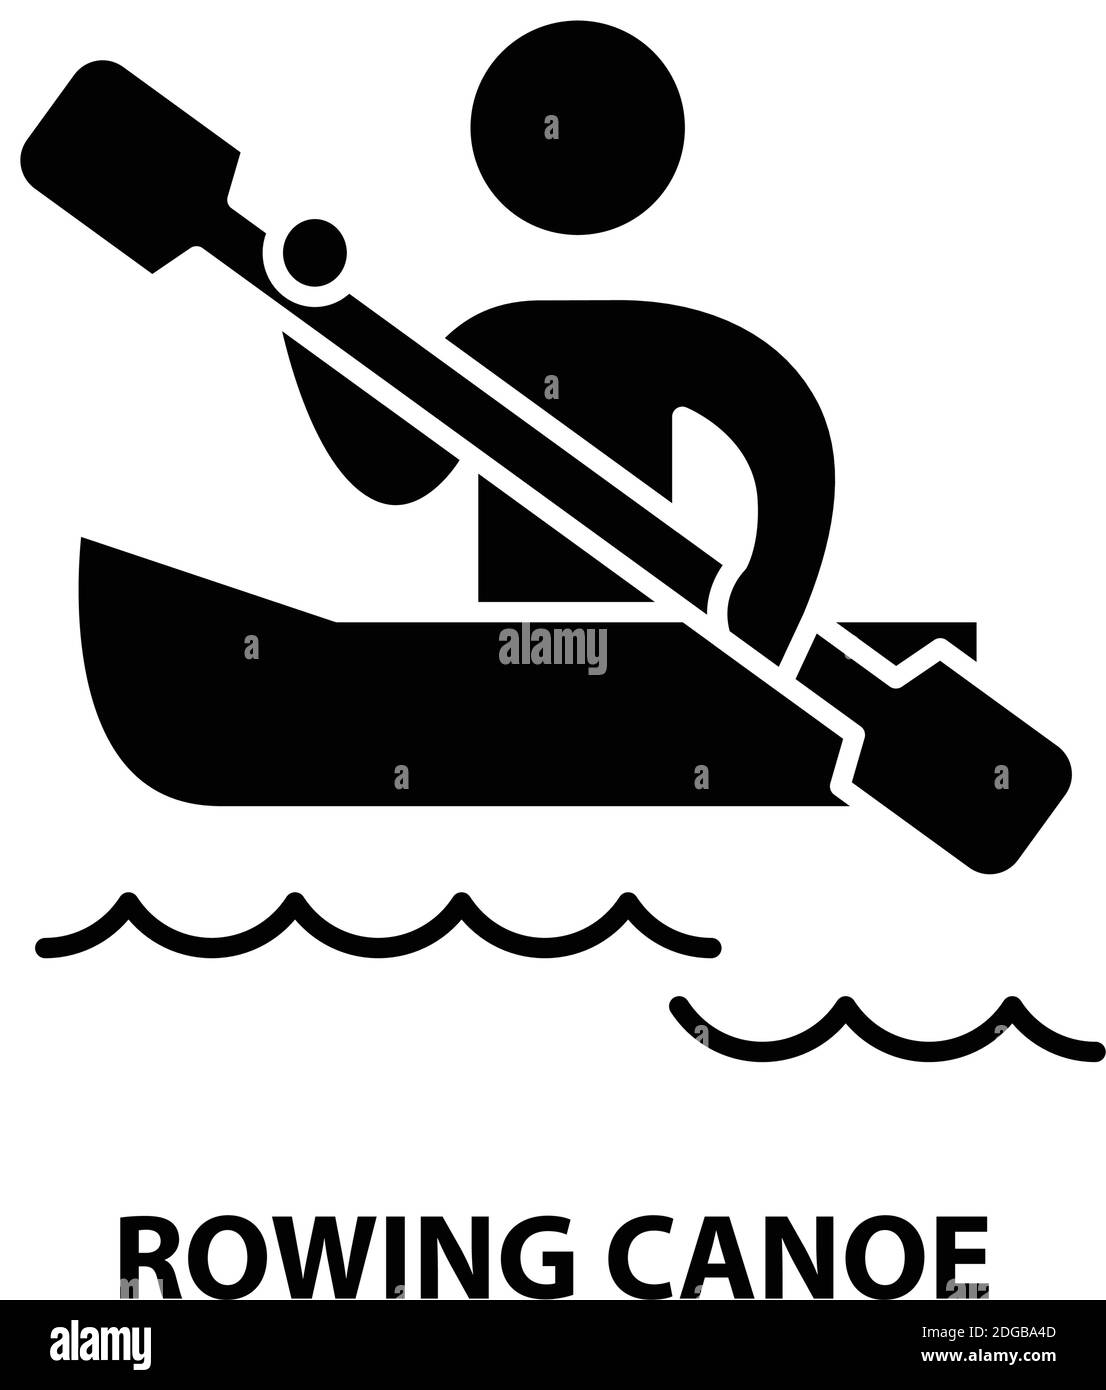 rowing canoe icon, black vector sign with editable strokes, concept illustration Stock Vector